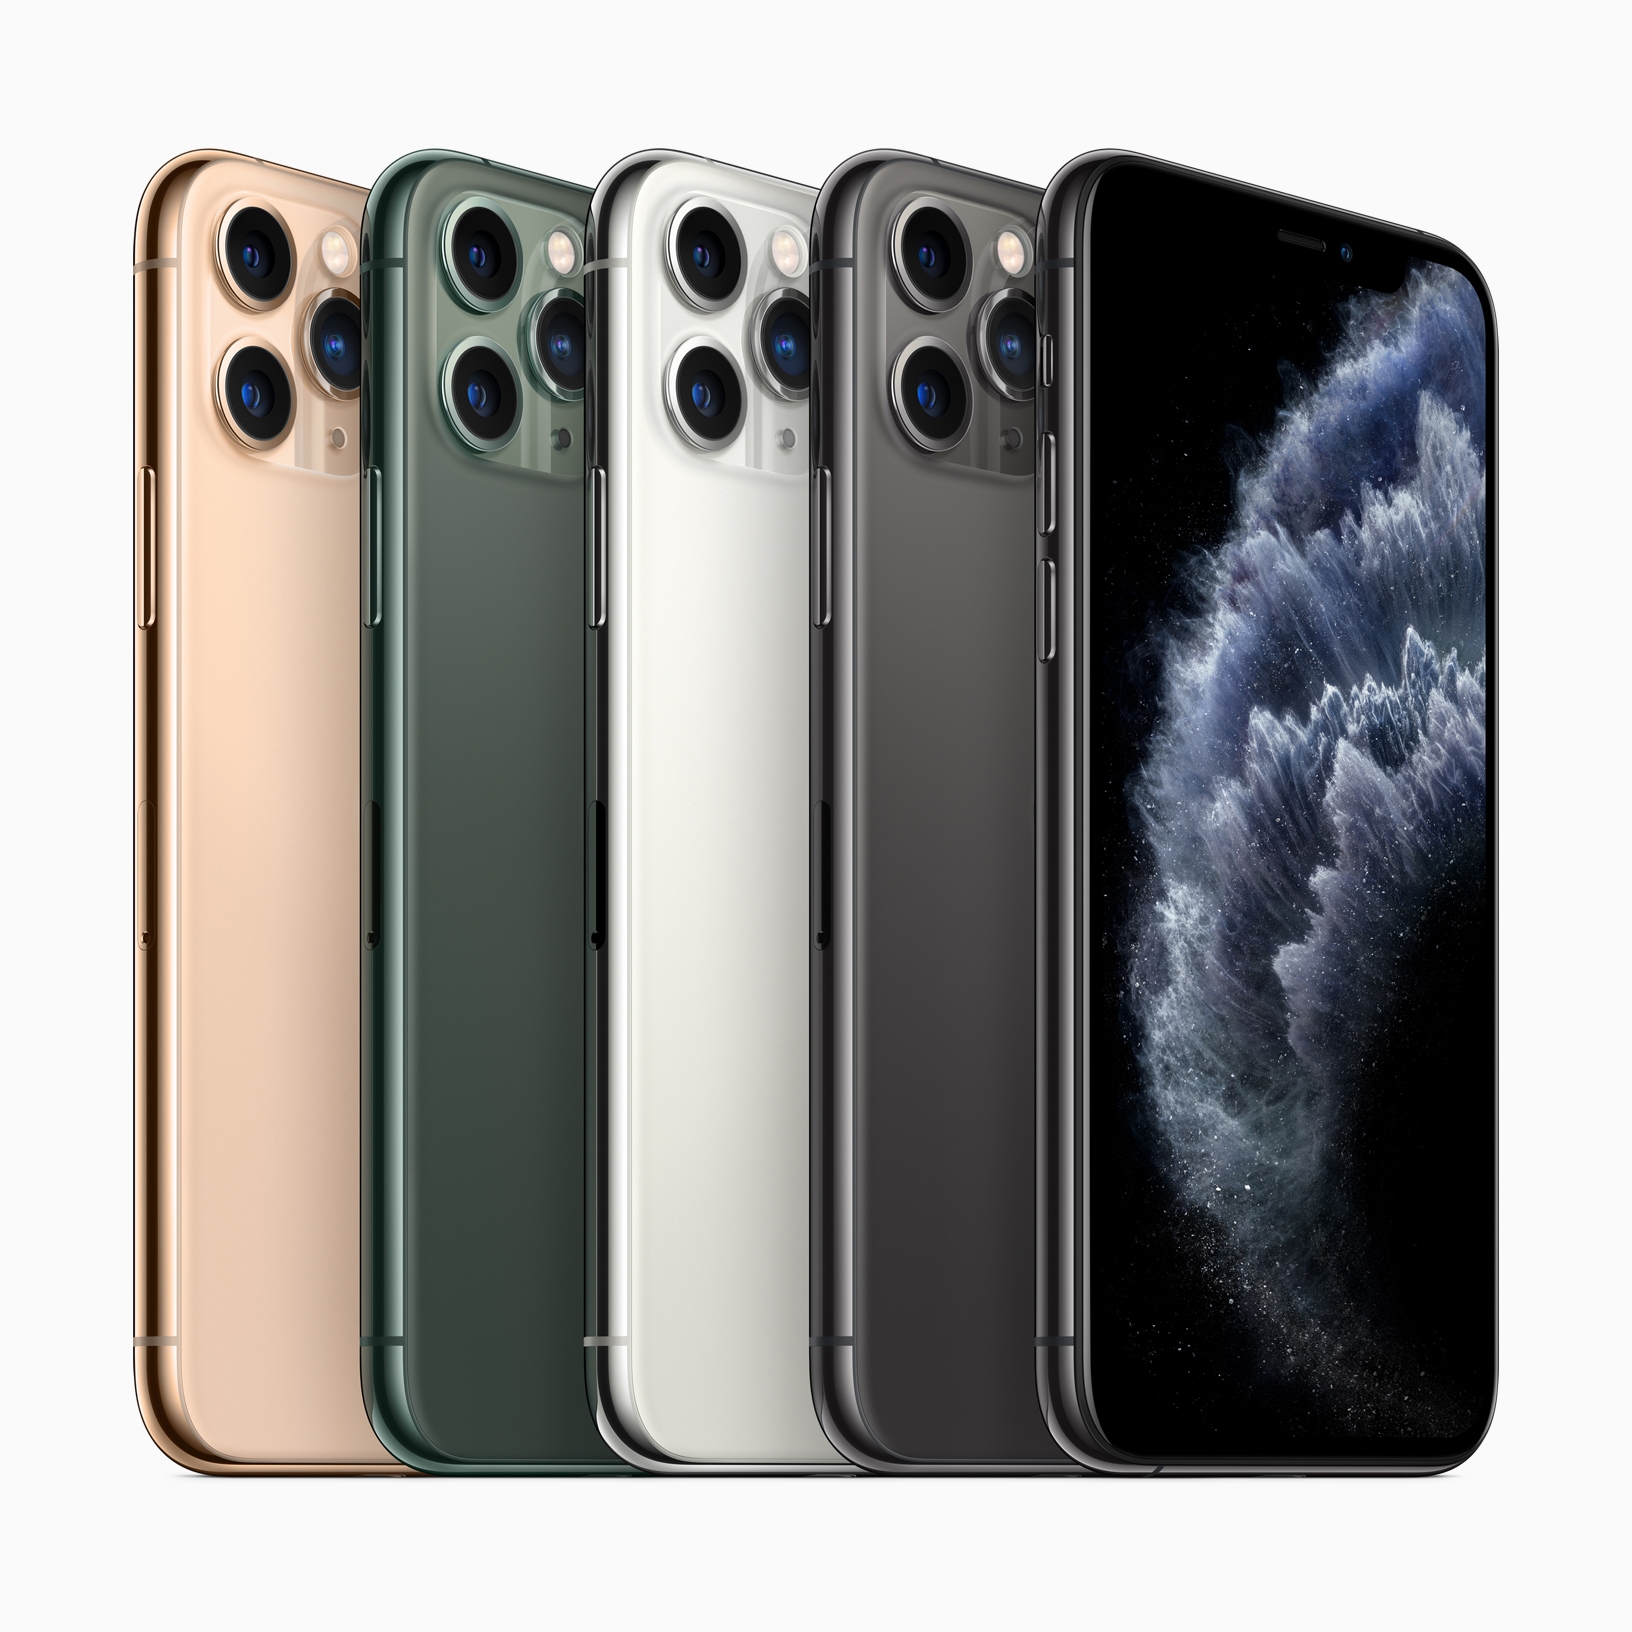 Iphone 11 Pro And Iphone 11 Pro Max Tech Specs